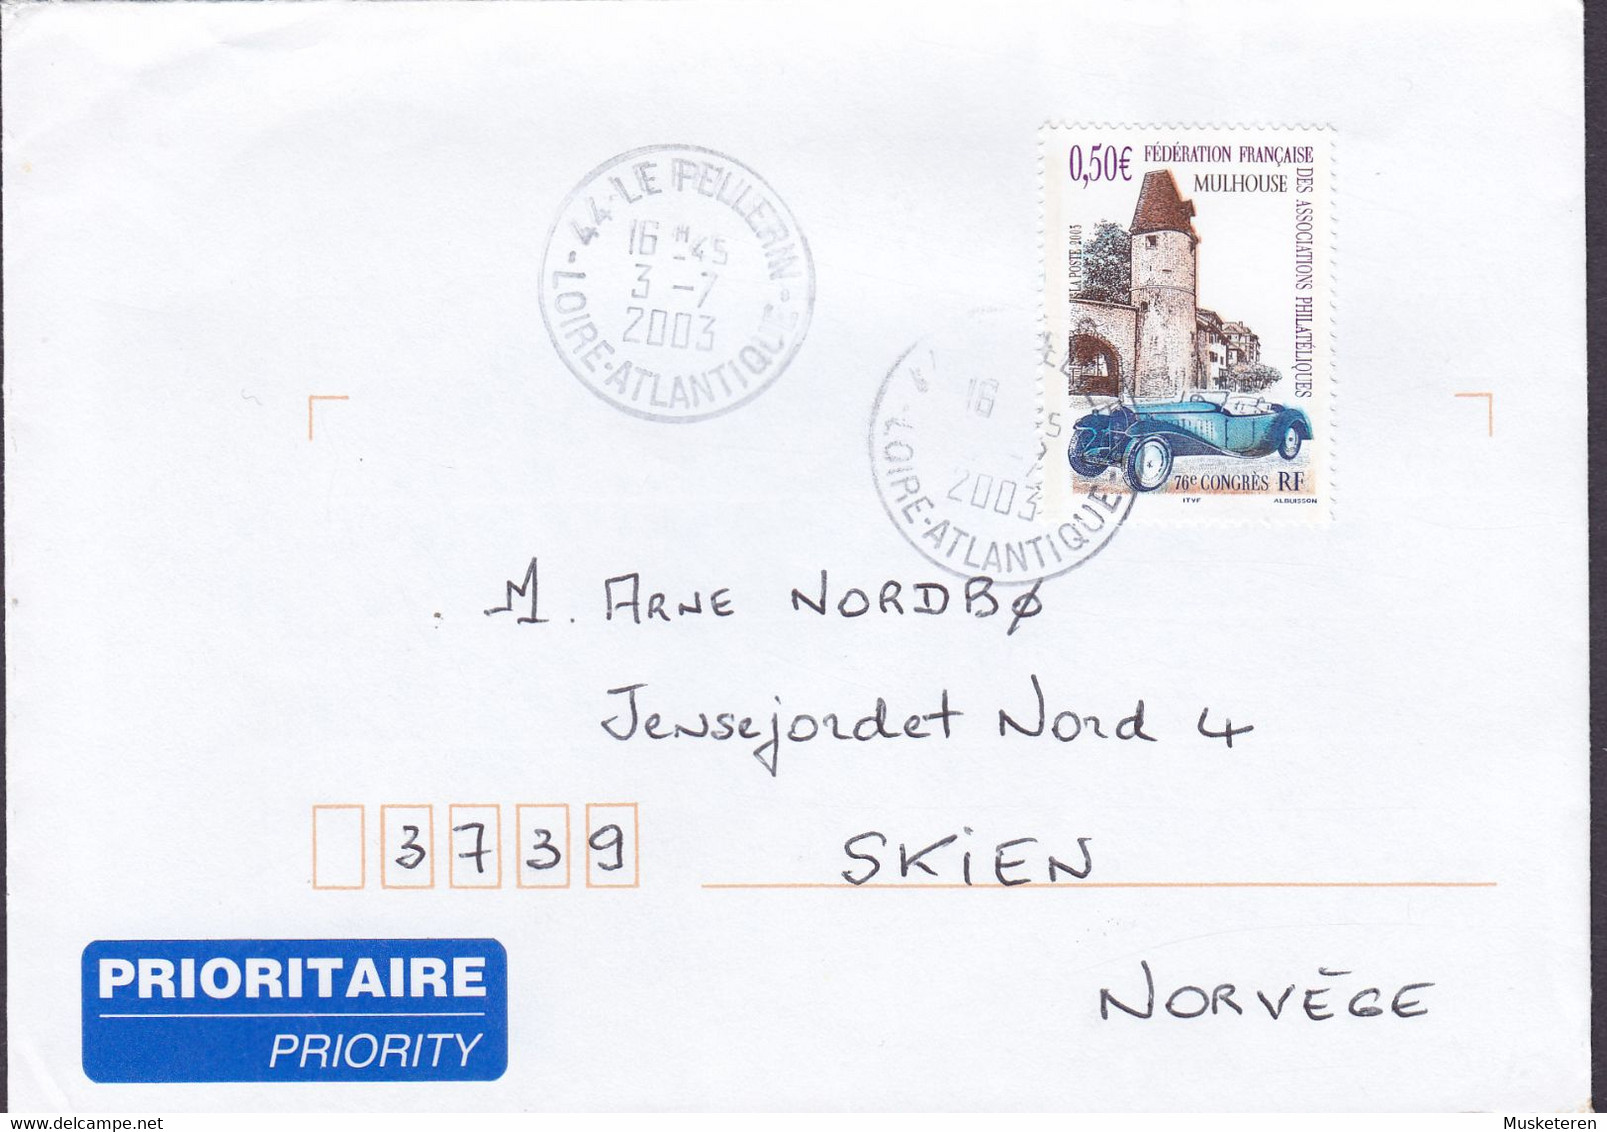 France PRIORITAIRE Label LE PELLERIN Lore-Atlantique 2003 Cover Lettre SKIEN Norway ERROR Variety Misplaced Colour !! - Lettres & Documents